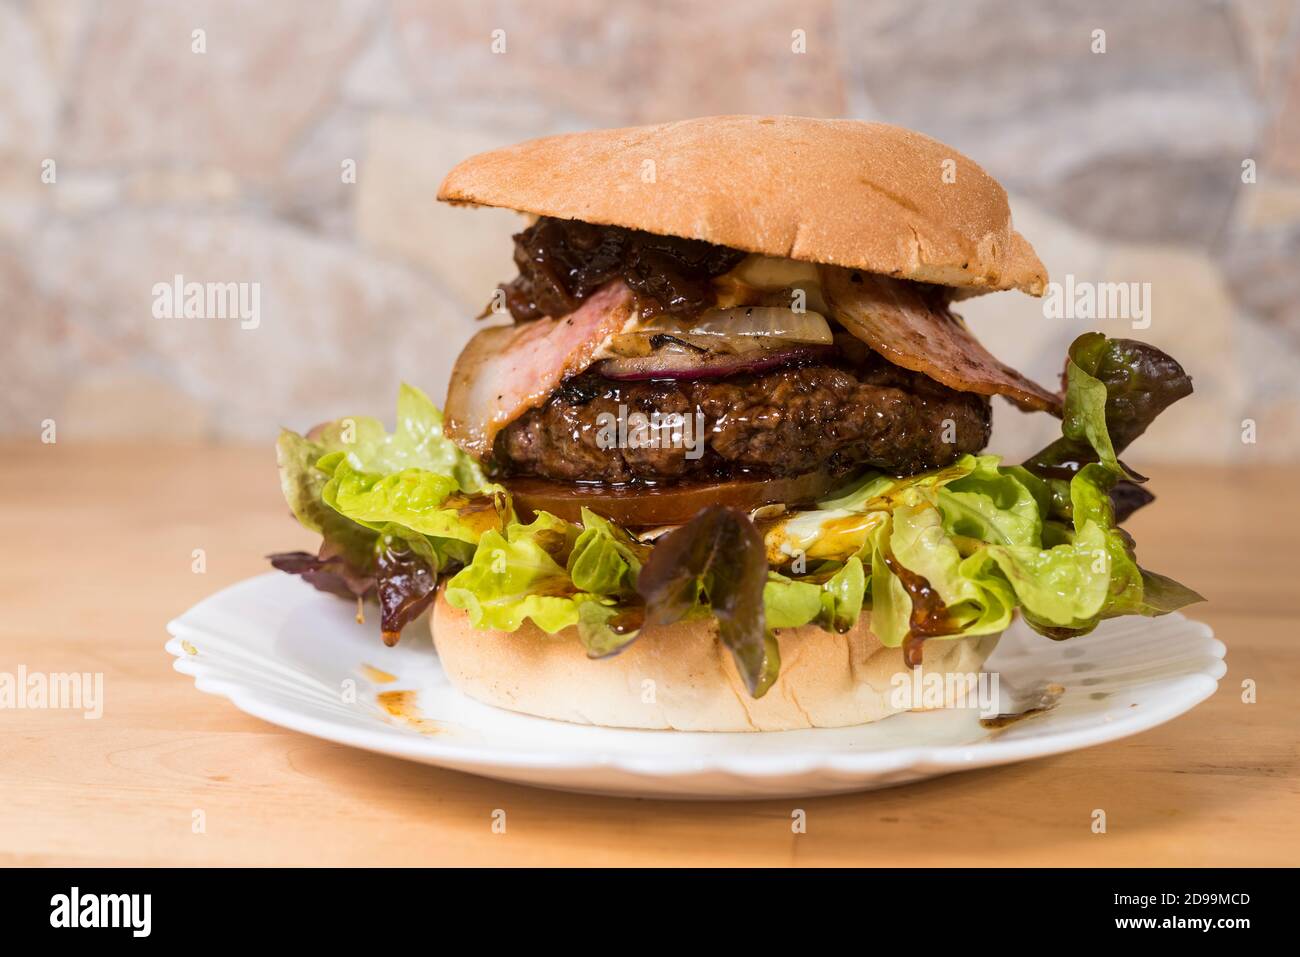 cheeseburger and lettuce Stock Photo